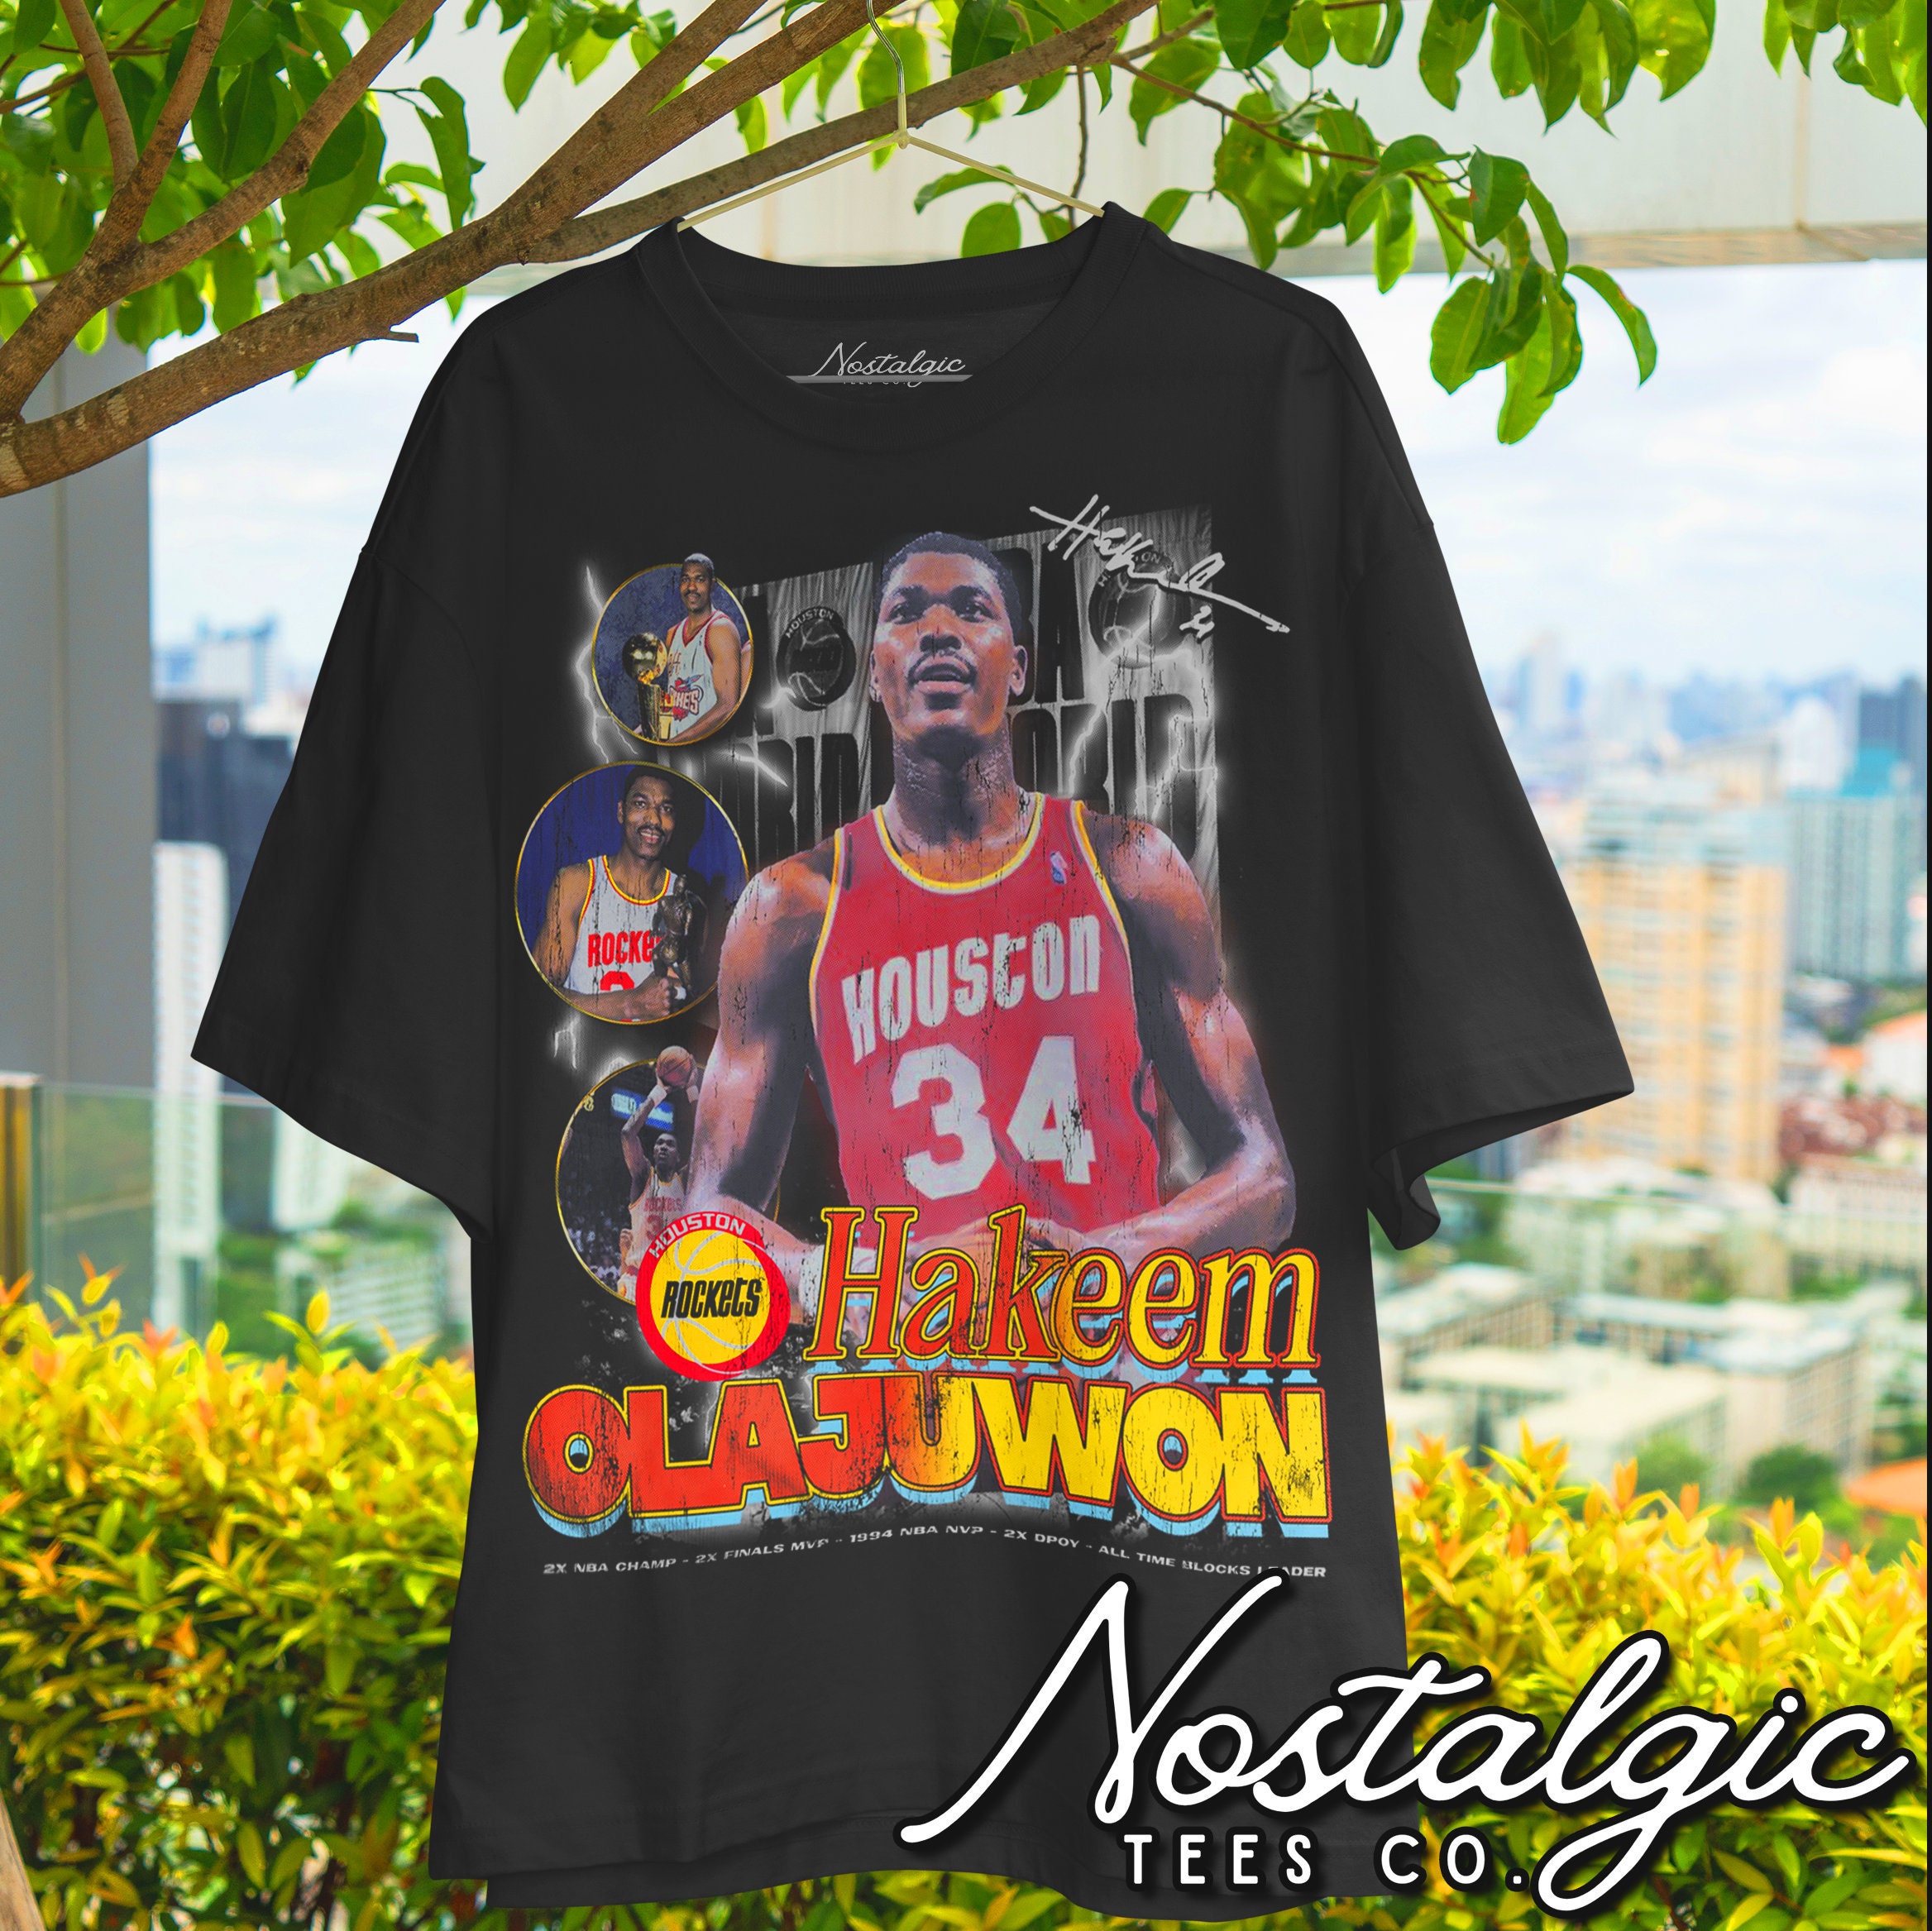  Middle of the Road Hakeem Olajuwon - Men's Soft & Comfortable T- Shirt SFI #G522168, Black, Small : Clothing, Shoes & Jewelry